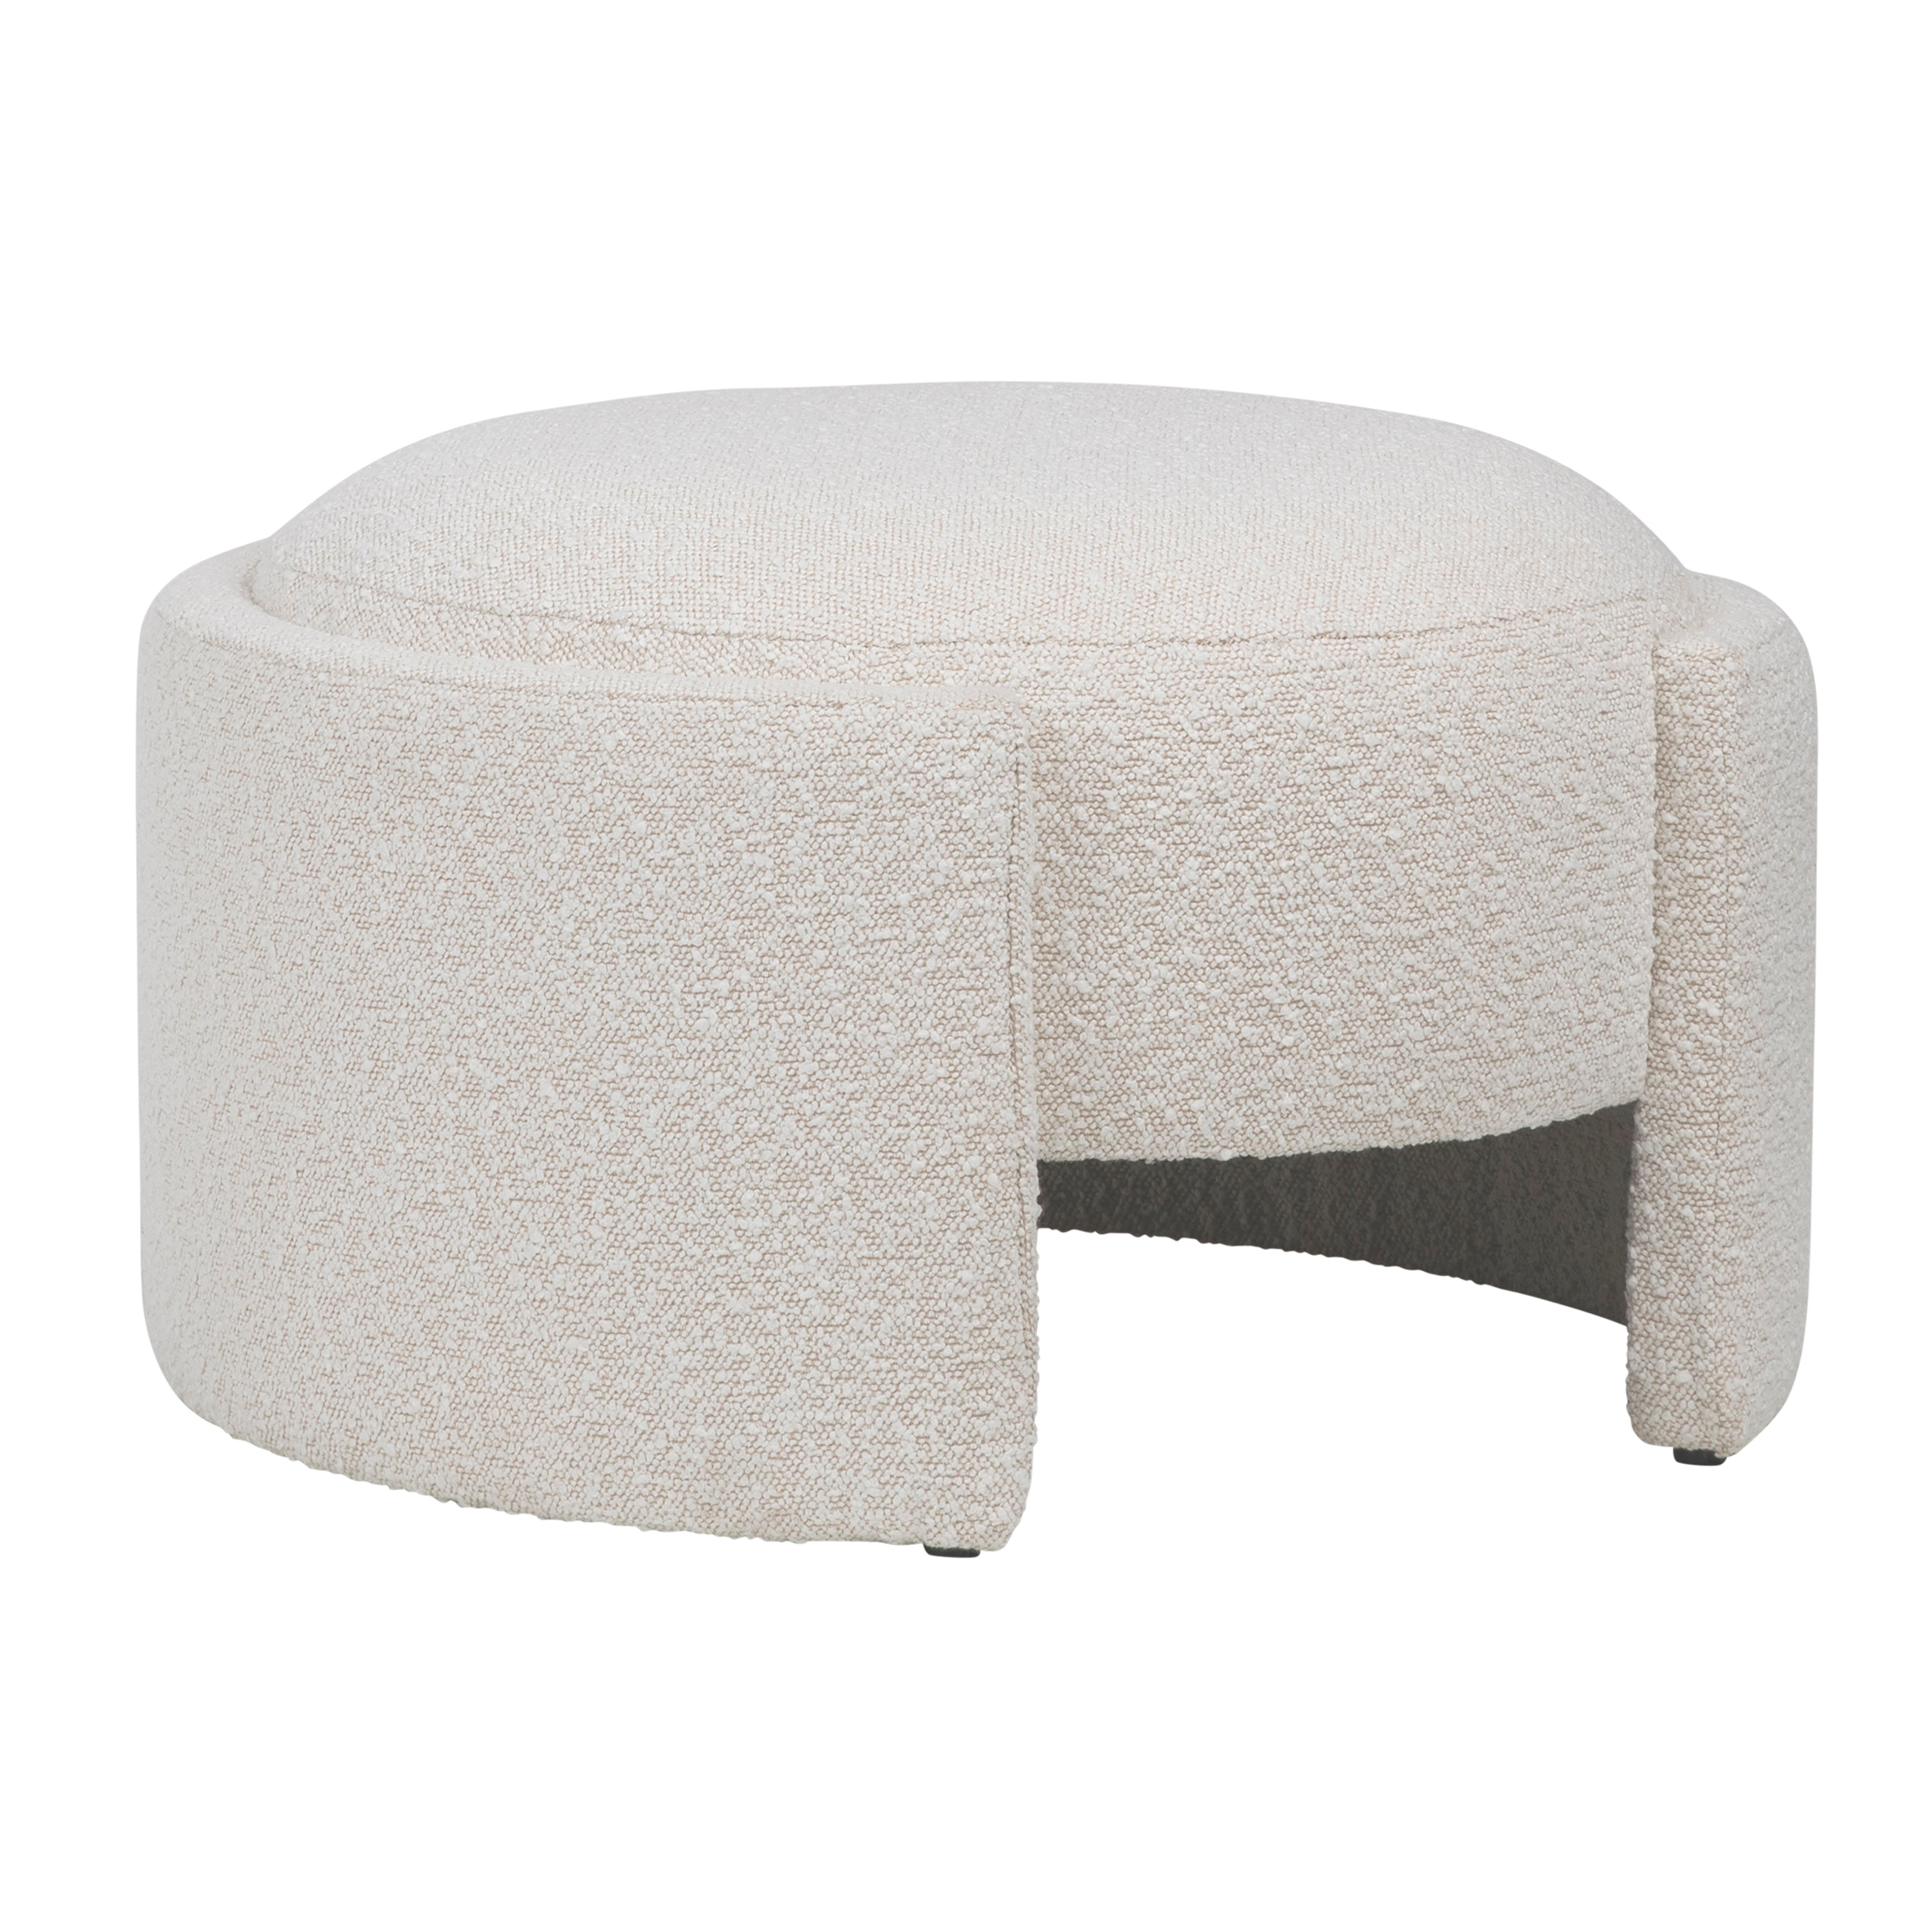 Add a contemporary touch to your seating arrangement with this lovely ottoman. Featuring a round frame supported by a stunning off-white boucle upholstery for extra softness and comfort. Use this 16x28” ottoman as a center table to display small tray and knick-knacks or as a place to prop your feet up after a long day.Depth : 25.5 in Amethyst Home provides interior design, new home construction design consulting, vintage area rugs, and lighting in the Des Moines metro area.